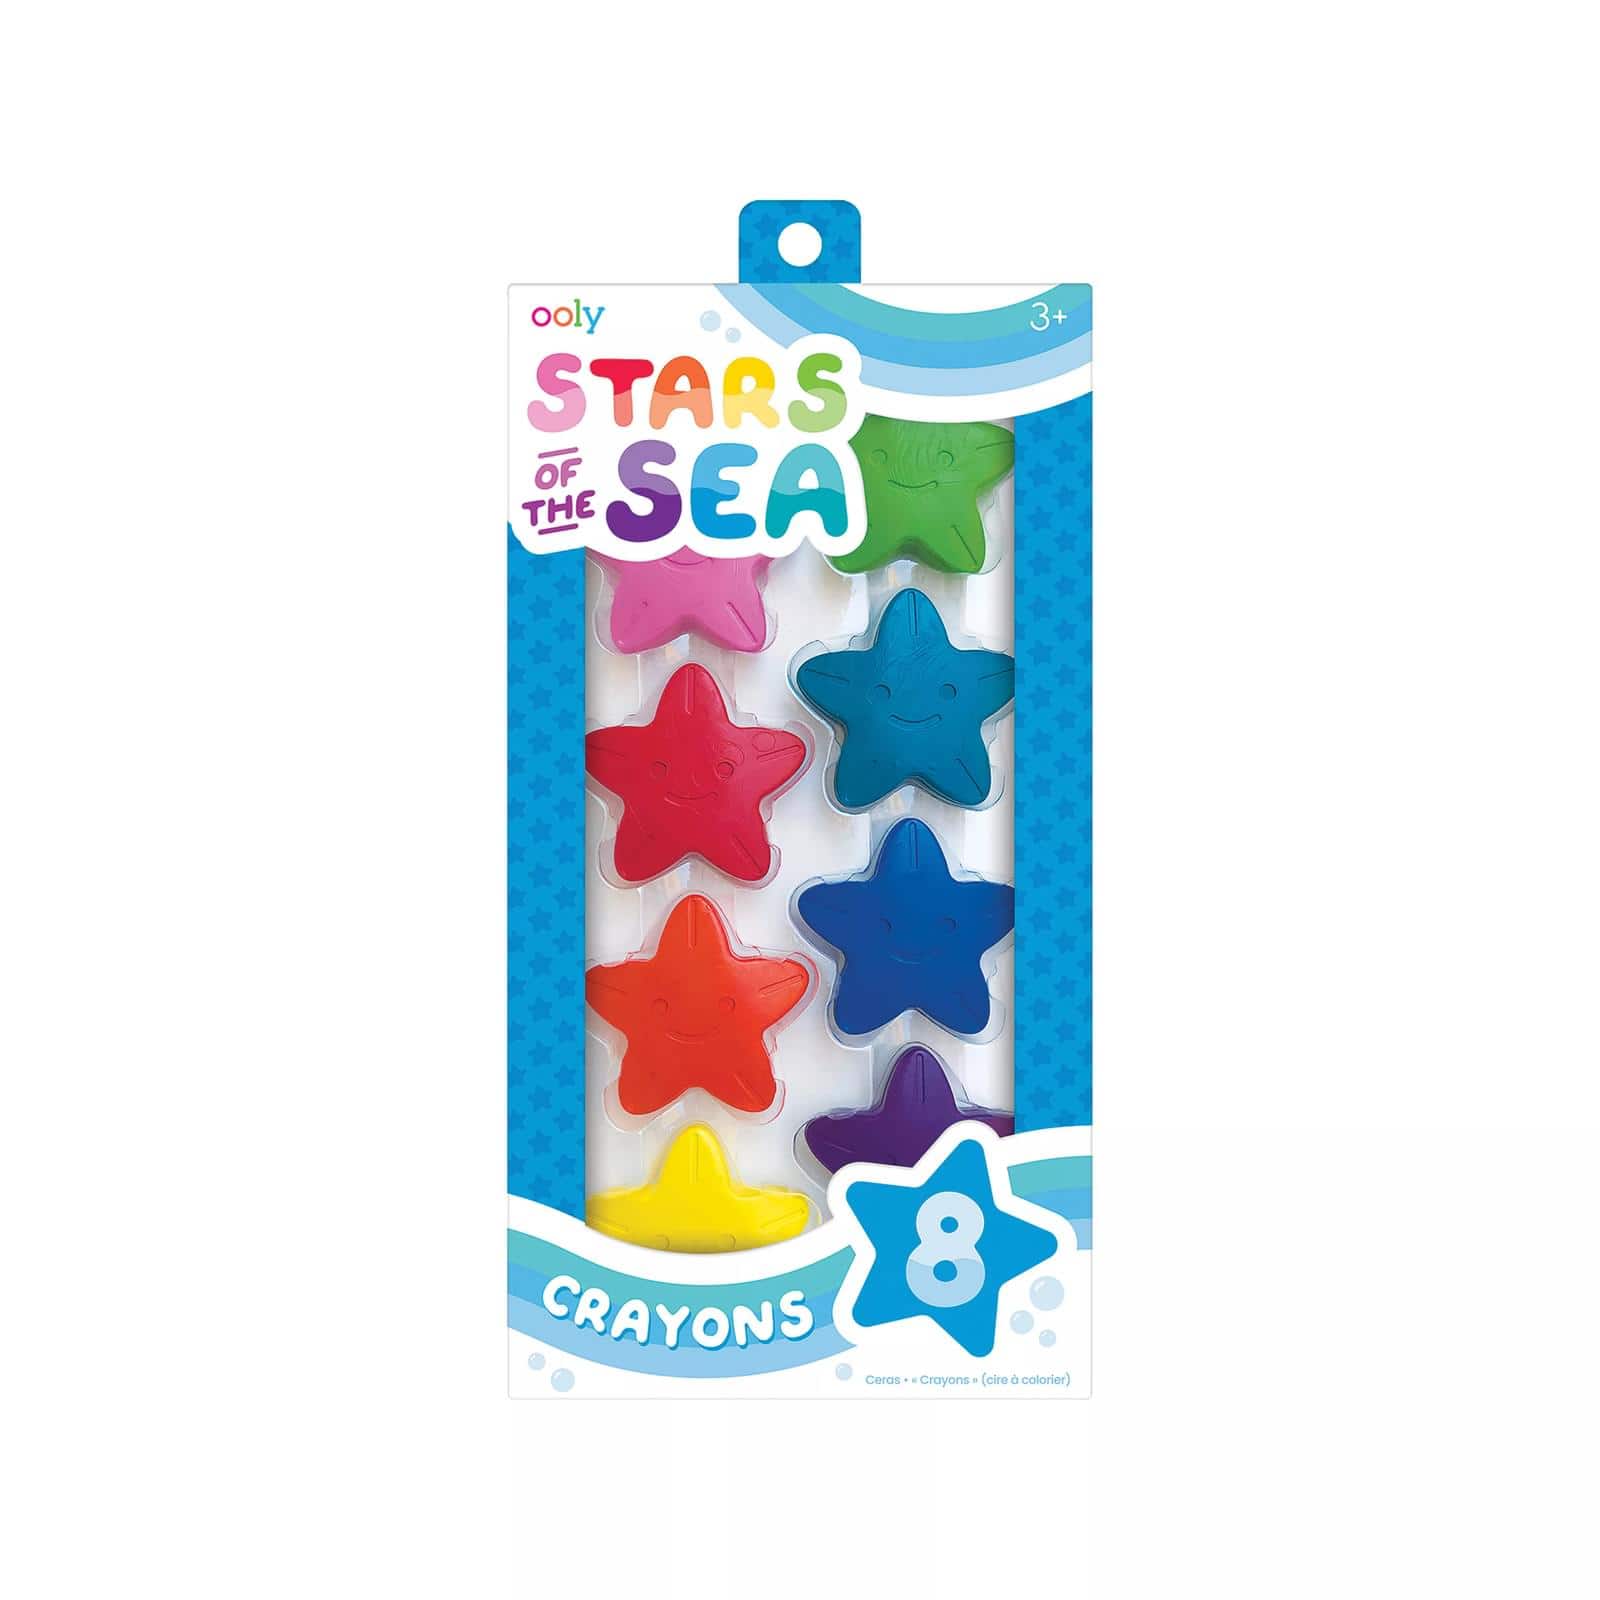 OOLY Stars of the Sea Crayons, 8ct.